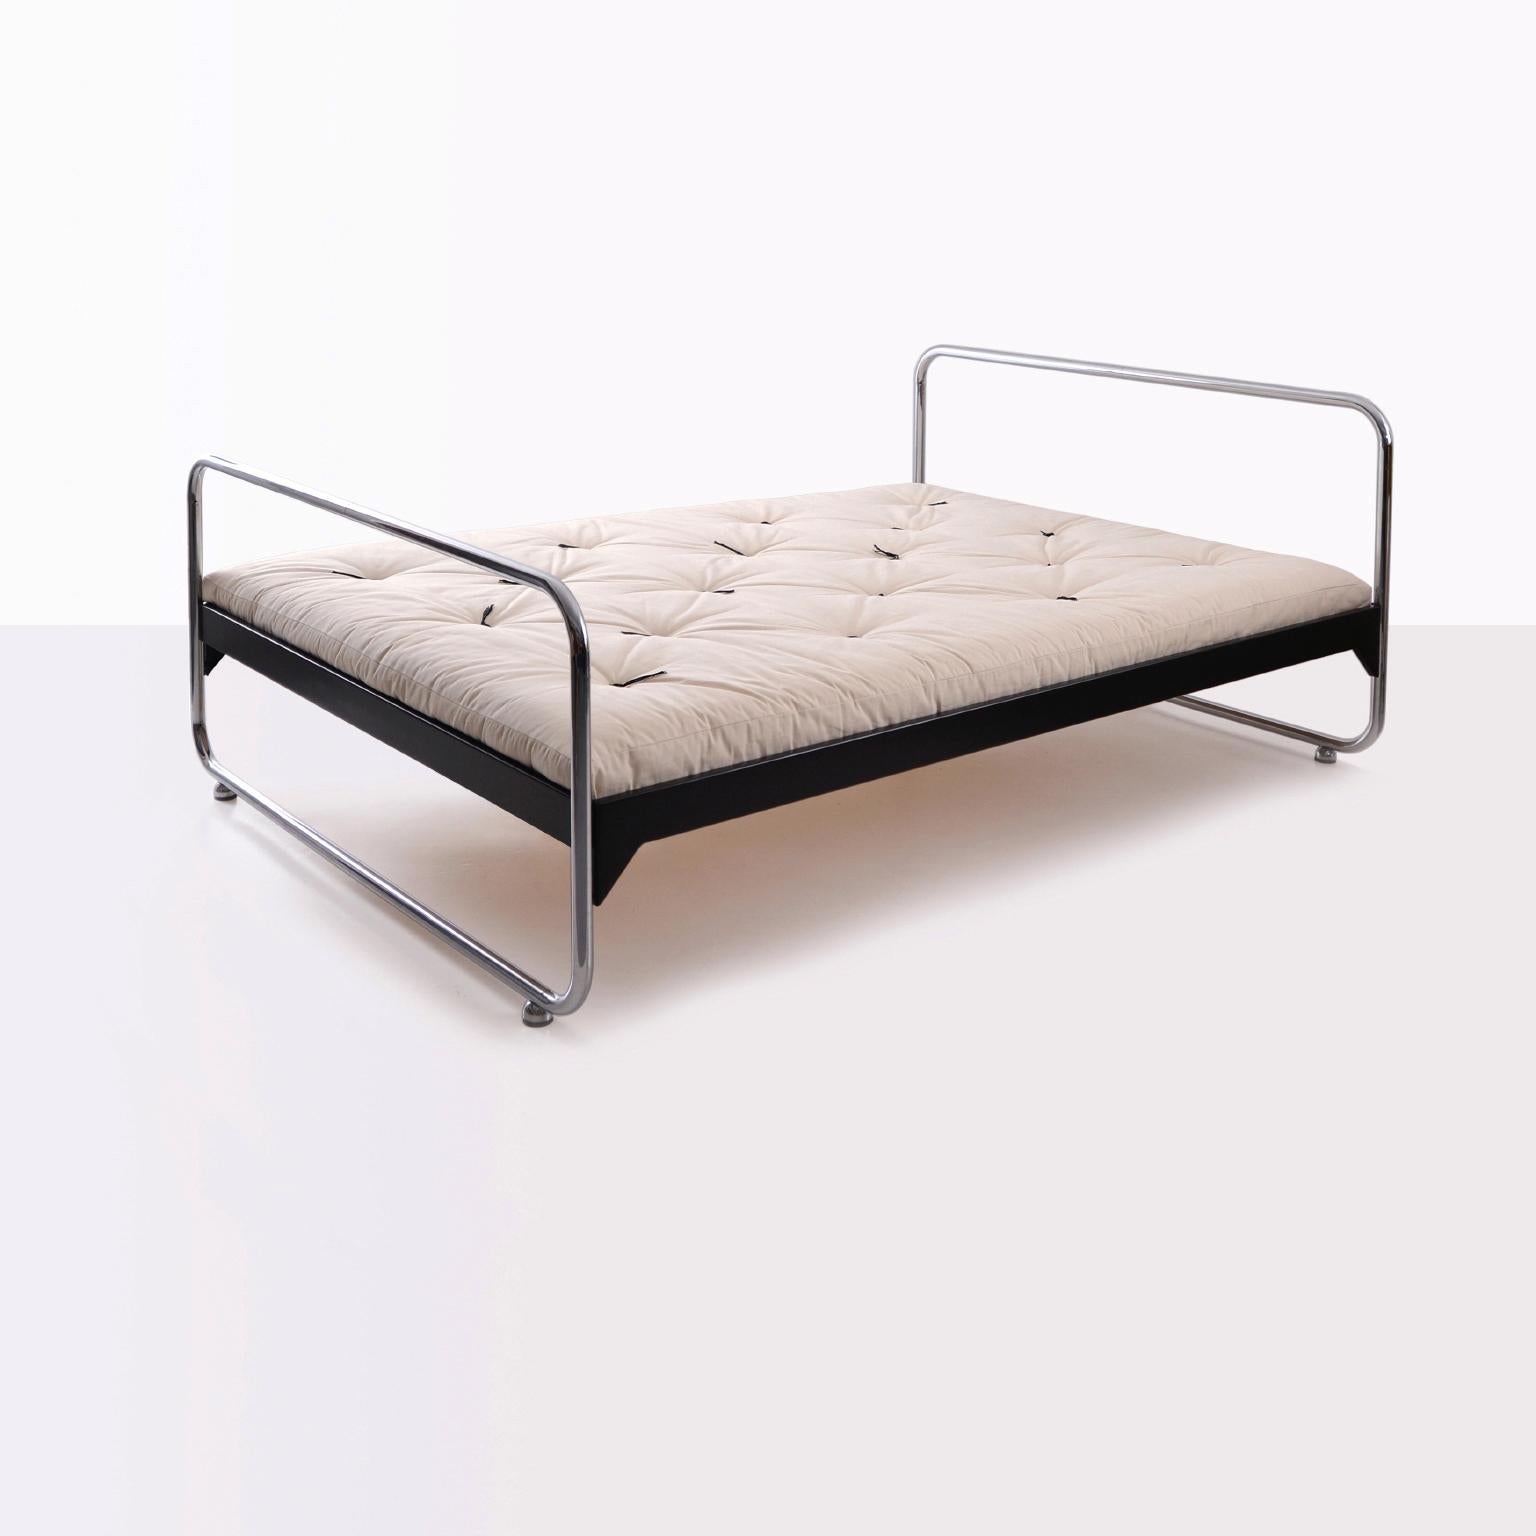 Original chromium-plated tubular steel bed from the New Objectivity (Neue Sachlichkeit) period, circa 1930. Redesigned by GMD Berlin and disponible on request in different amounts und dimensions.